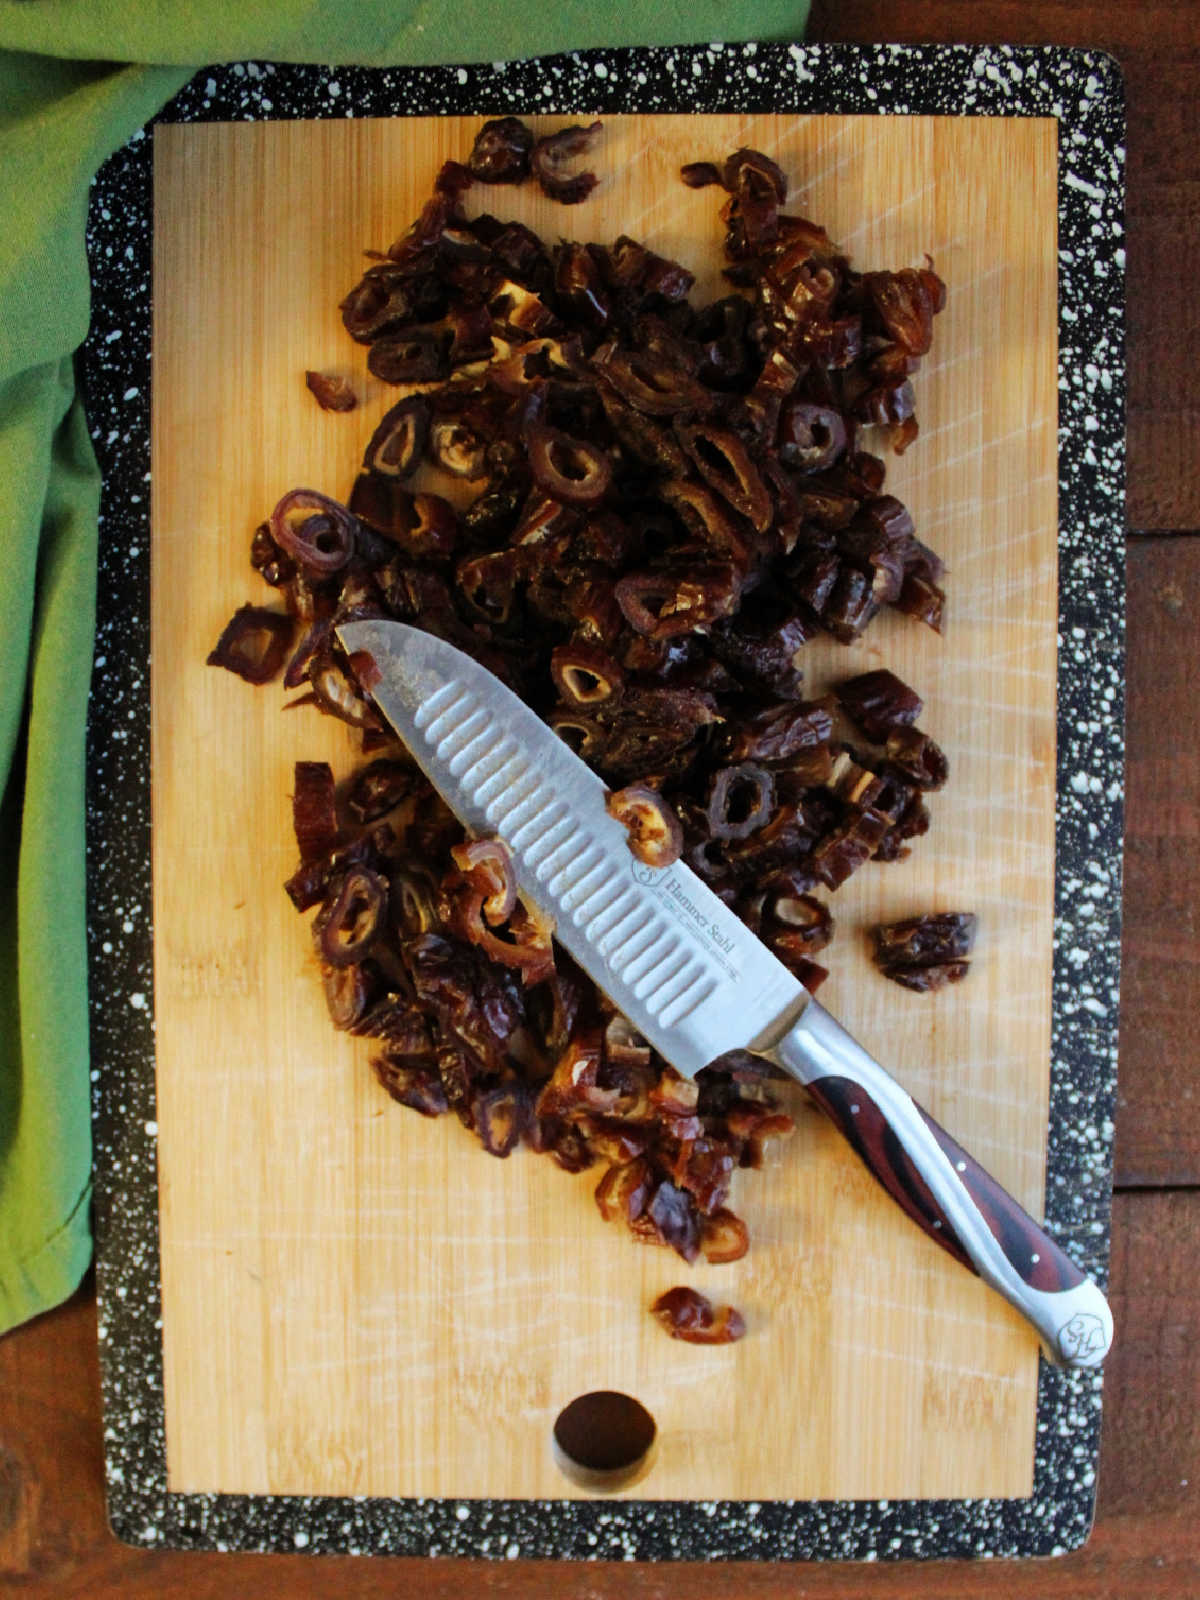 Cutting board with chopped dates and a knife.